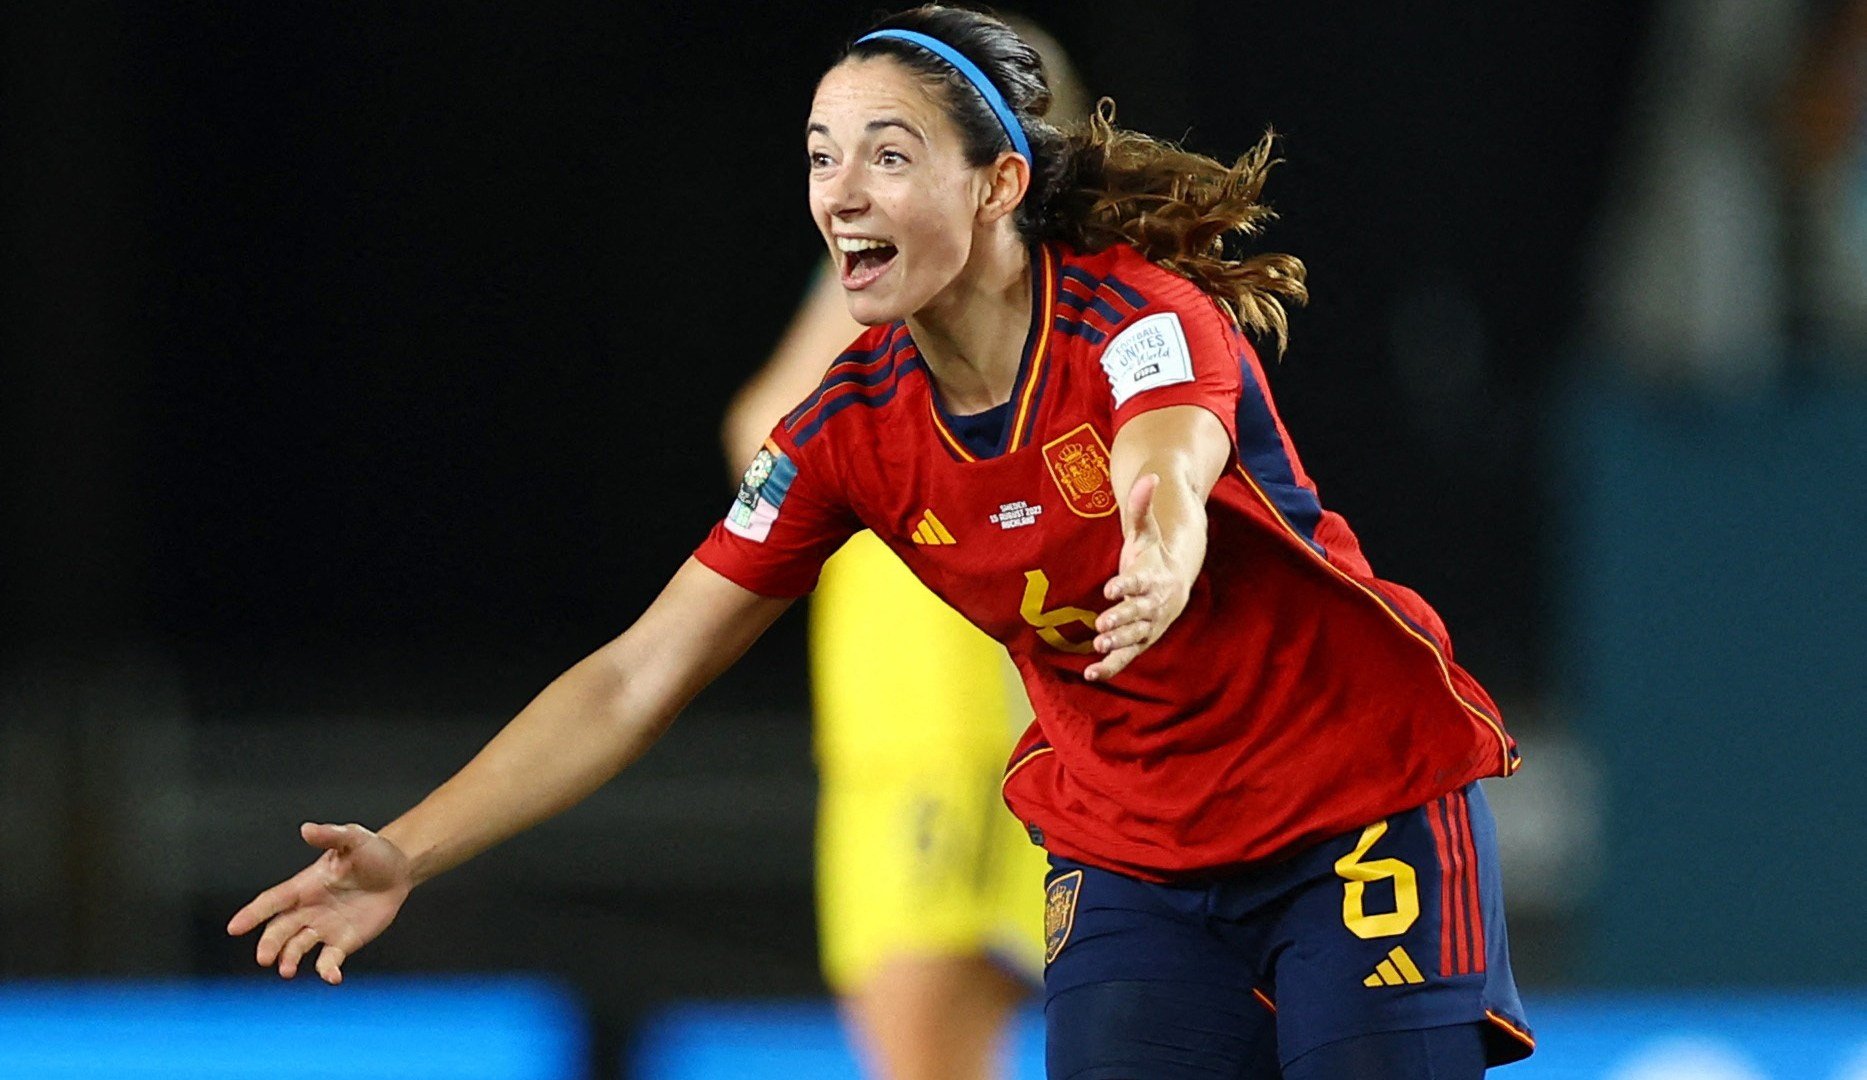 From Bonmati to Marta: Five top footballers to watch at Paris Olympics 2024